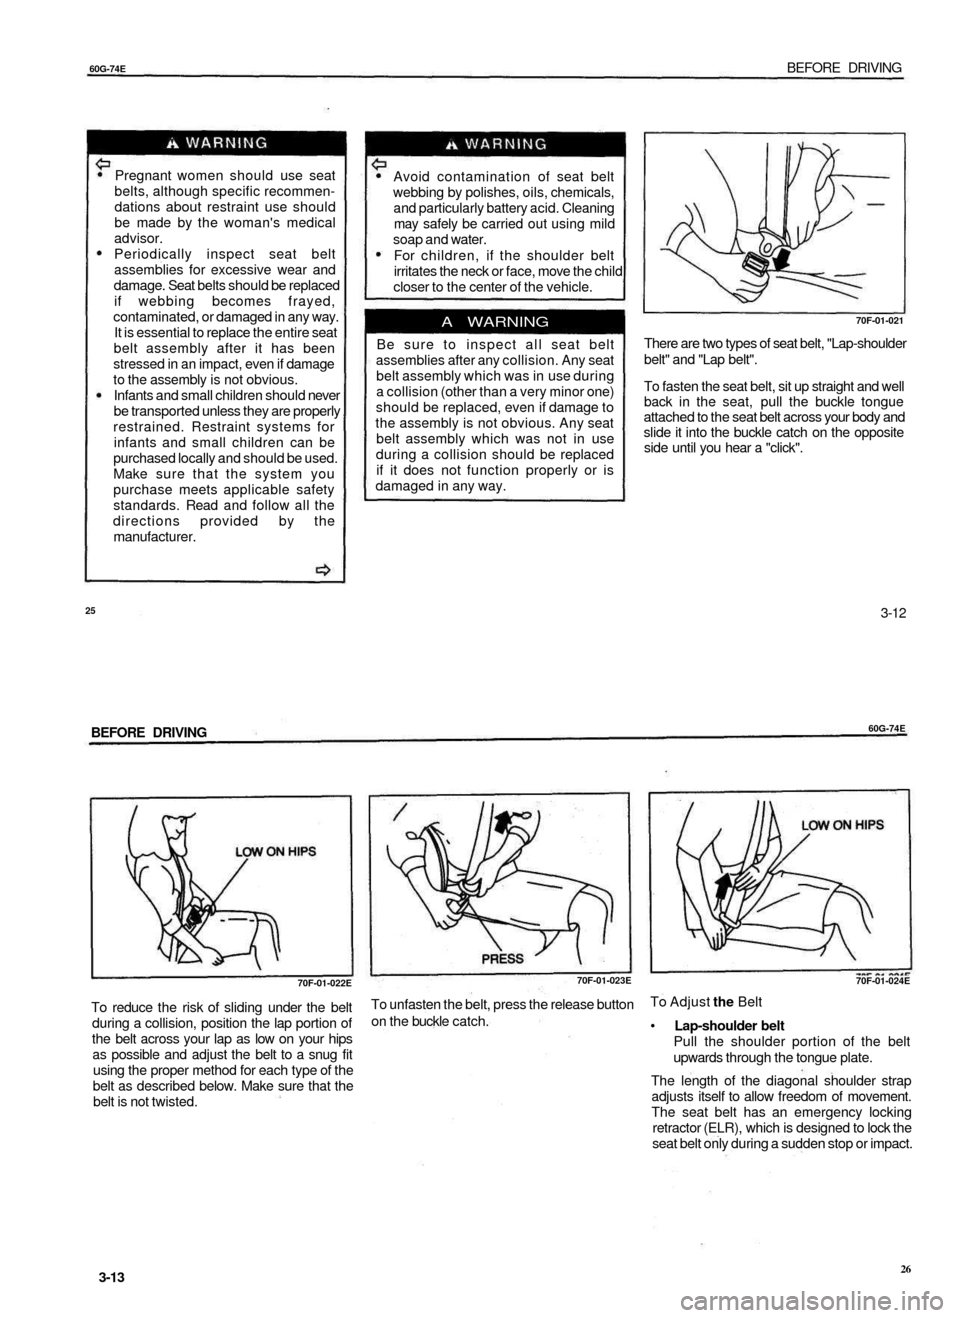 SUZUKI BALENO 1999 1.G Owners Manual 
60G-74E

BEFORE DRIVING

Pregnant women should use seat

belts, although specific recommen-

dations about restraint use should

be made by the womans medical

advisor.

Periodically inspect seat be